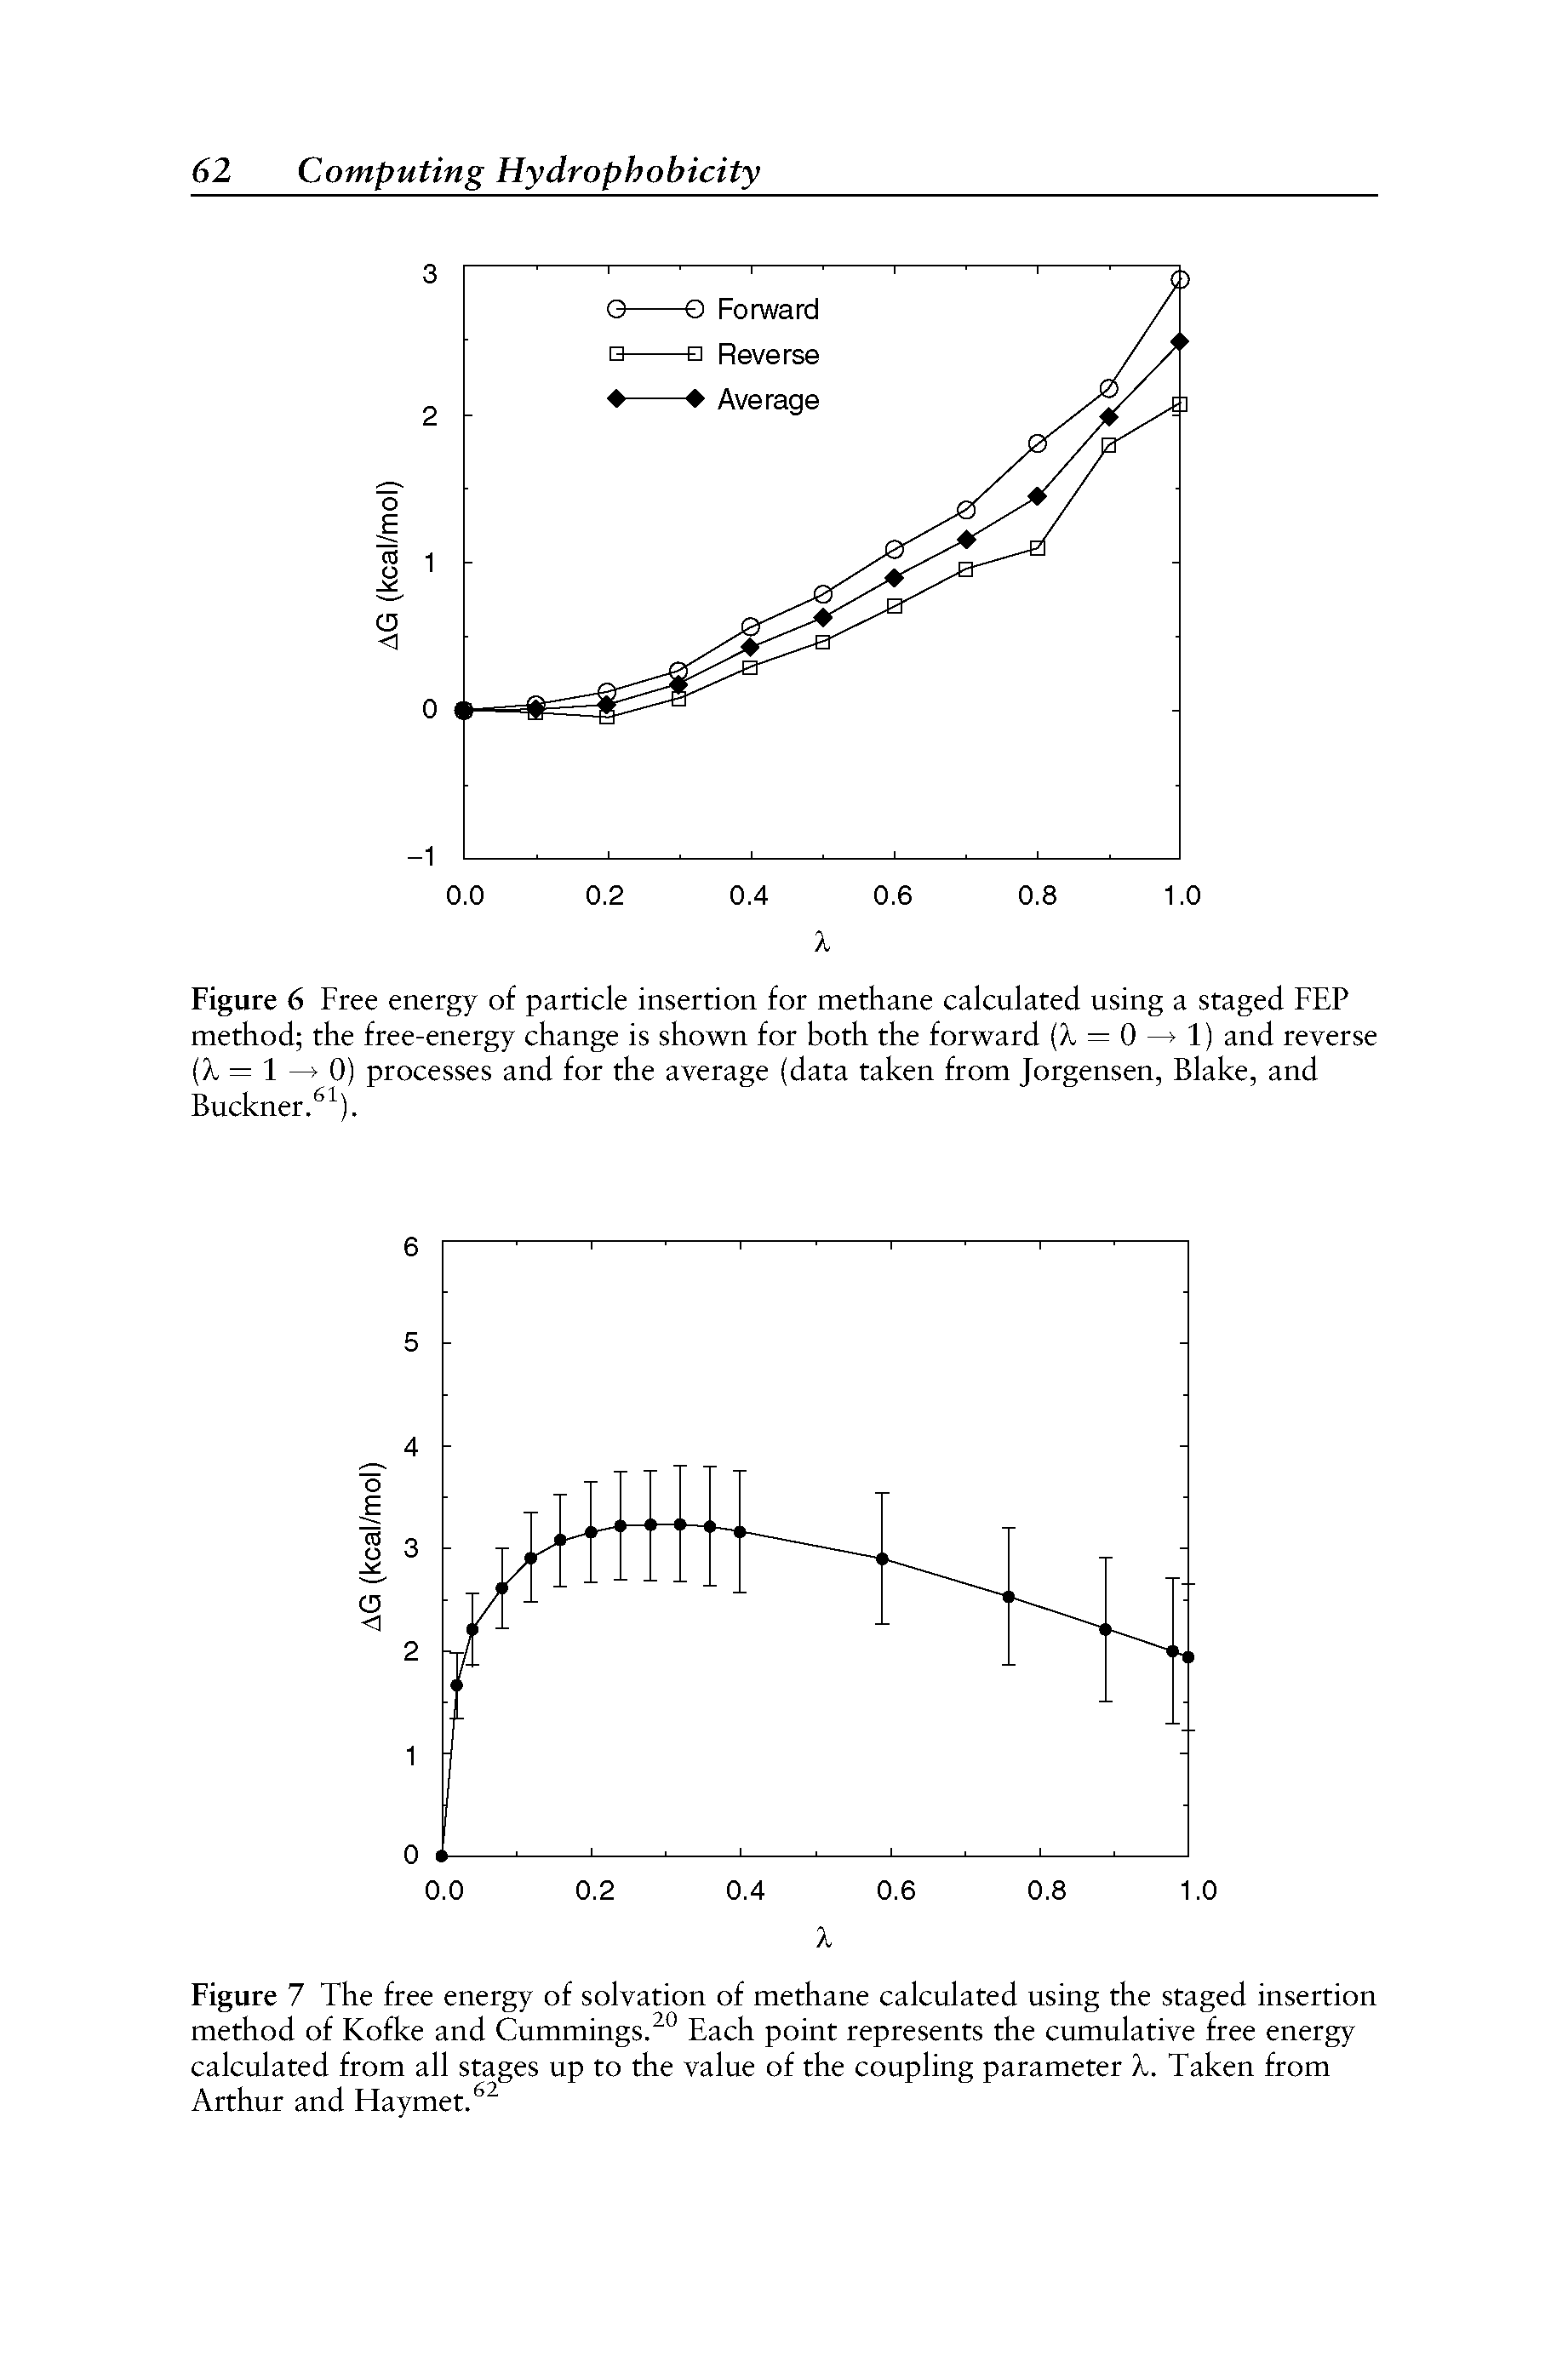 Figure 7 The free energy of solvation of methane calculated using the staged insertion method of Kofke and Cummings.Each point represents the cumulative free energy calculated from all stages up to the value of the coupling parameter X. Taken from Arthur and Haymet. ...